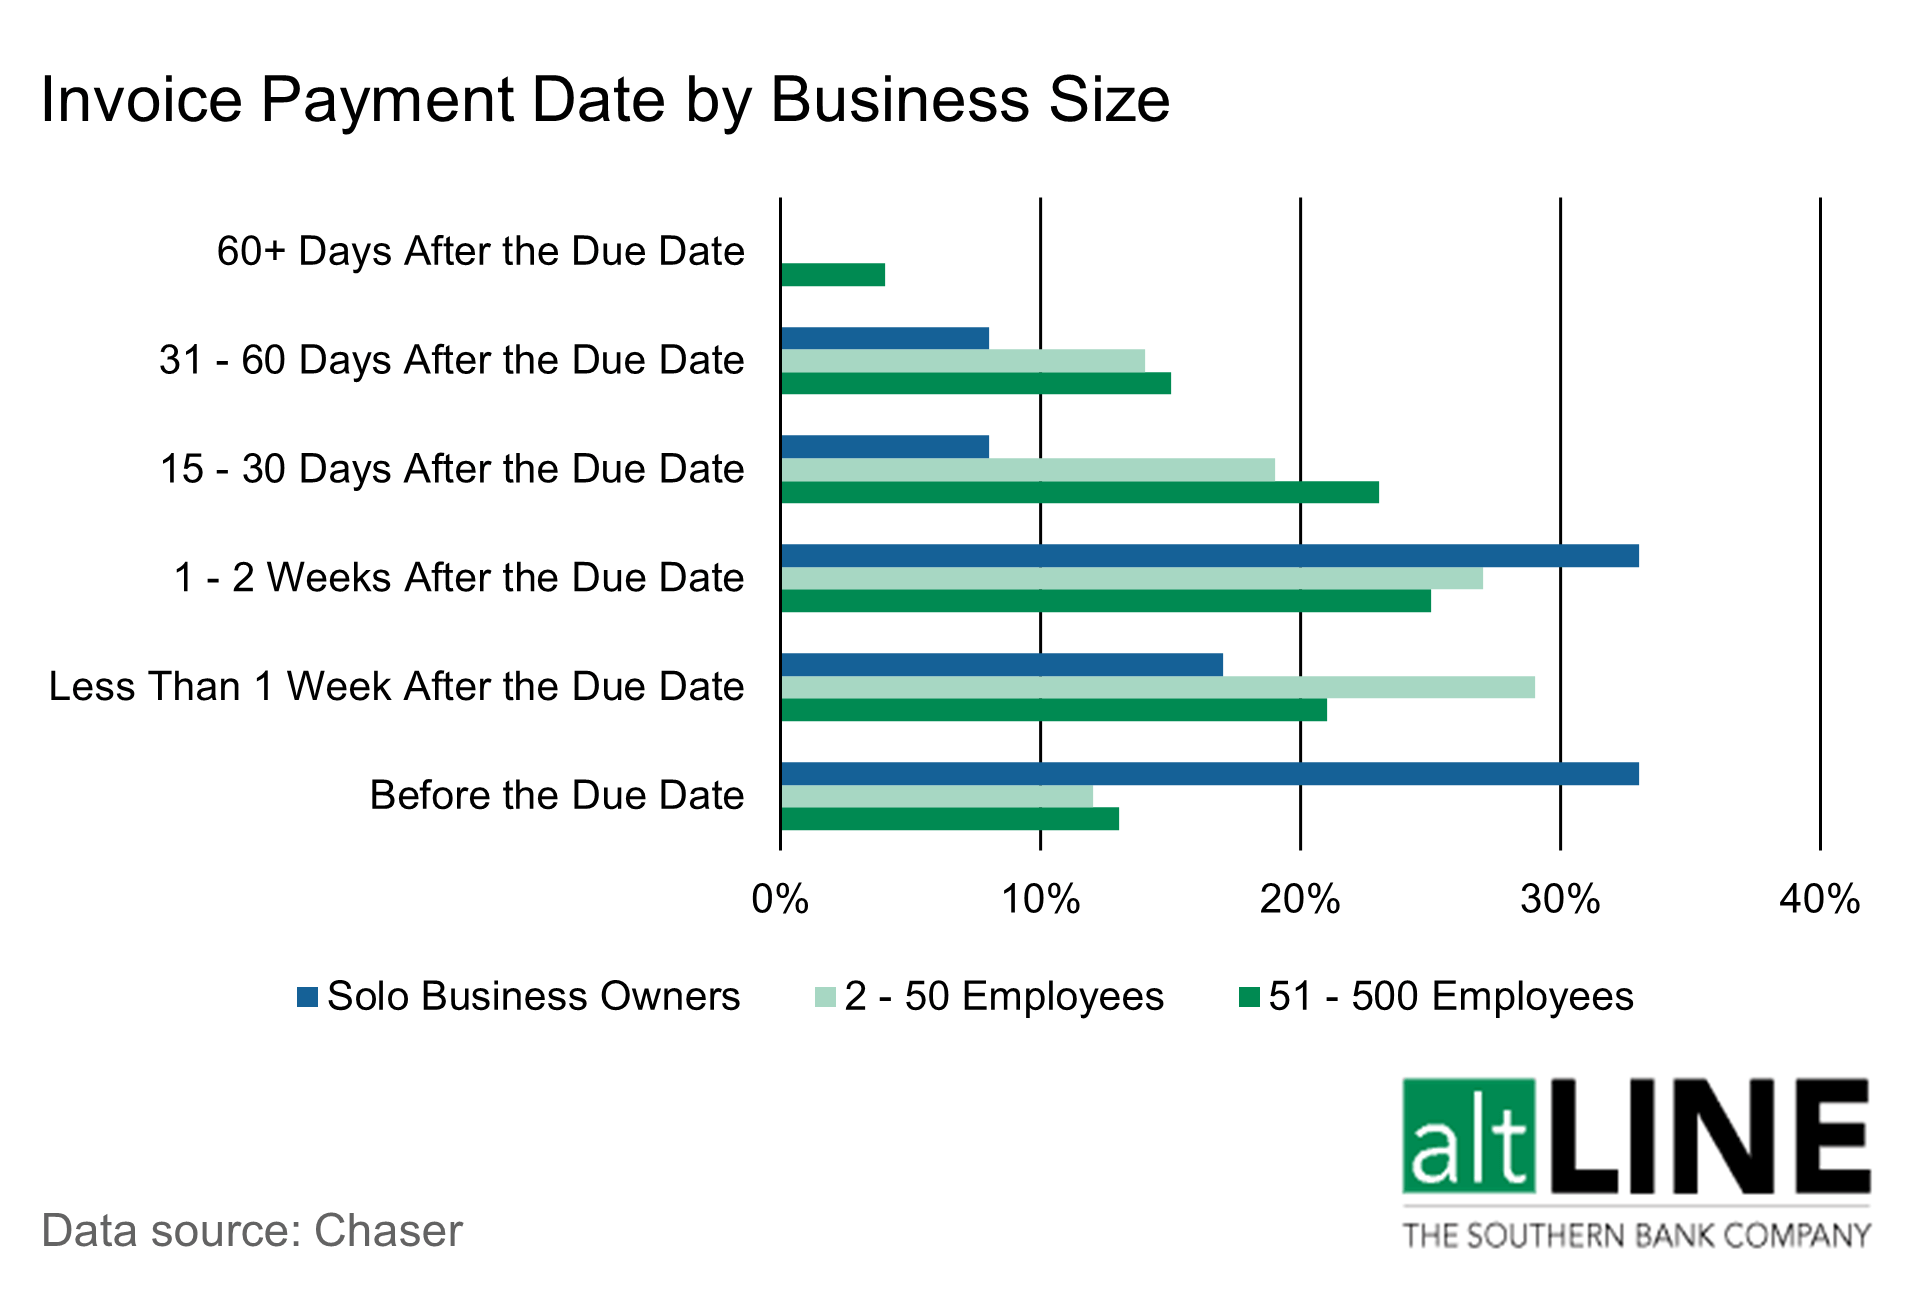 chart showing invoice payment date by business size